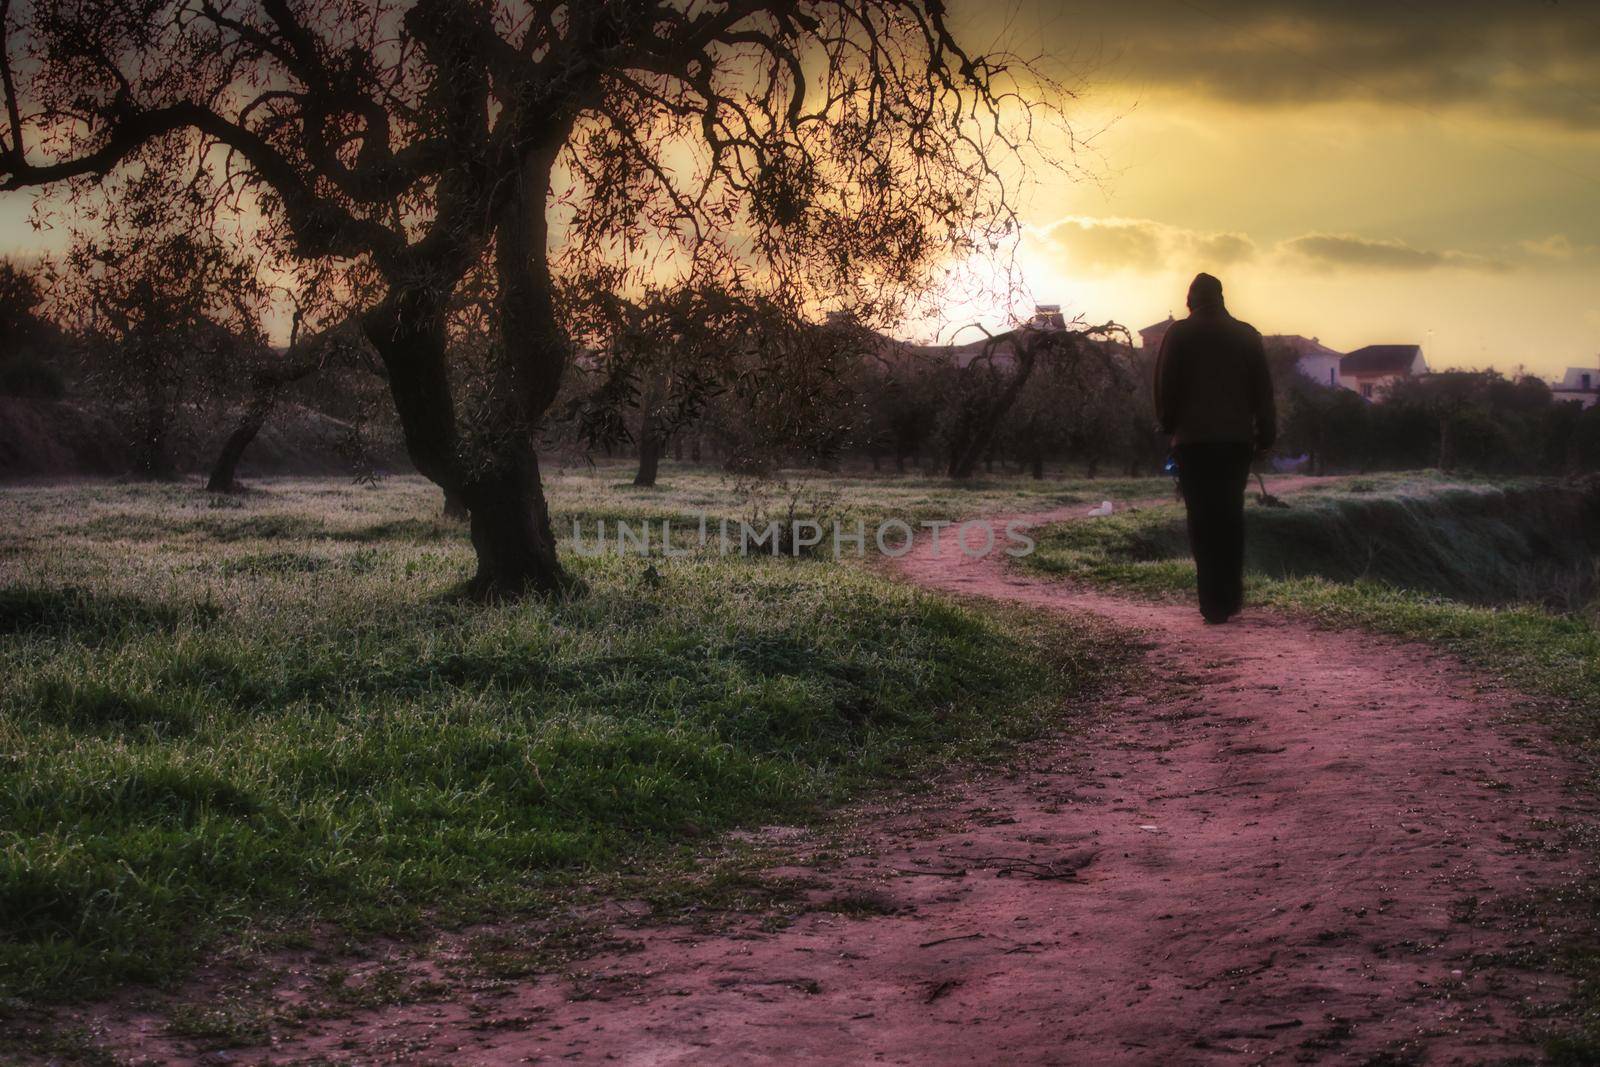 A man walking on an idylic country path with the setting sun in the distance